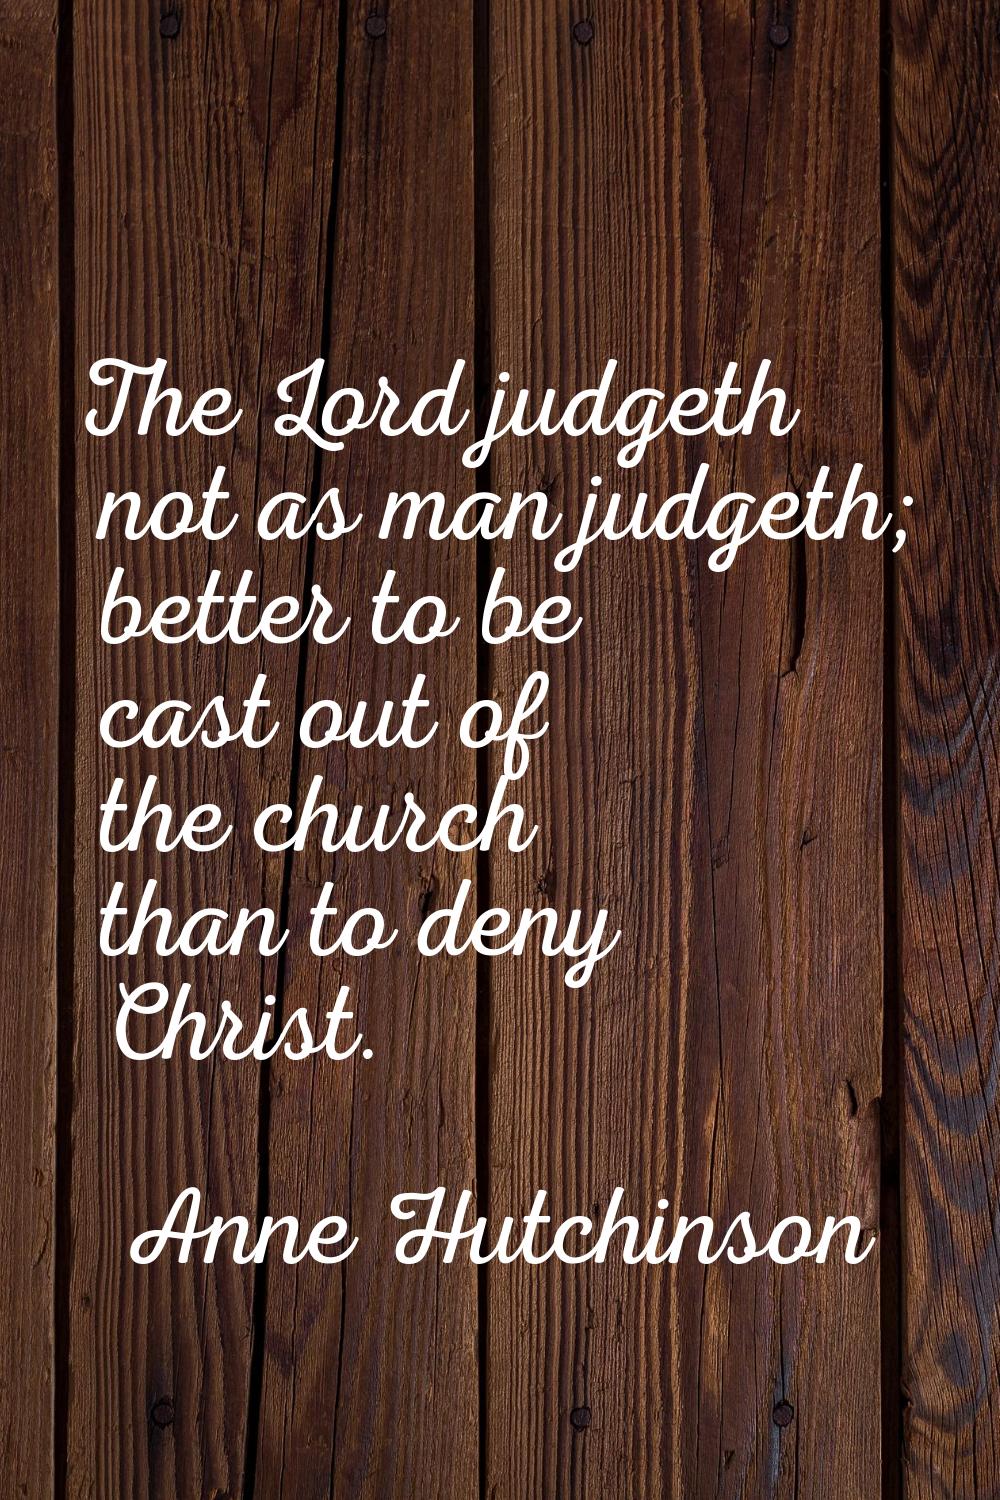 The Lord judgeth not as man judgeth; better to be cast out of the church than to deny Christ.